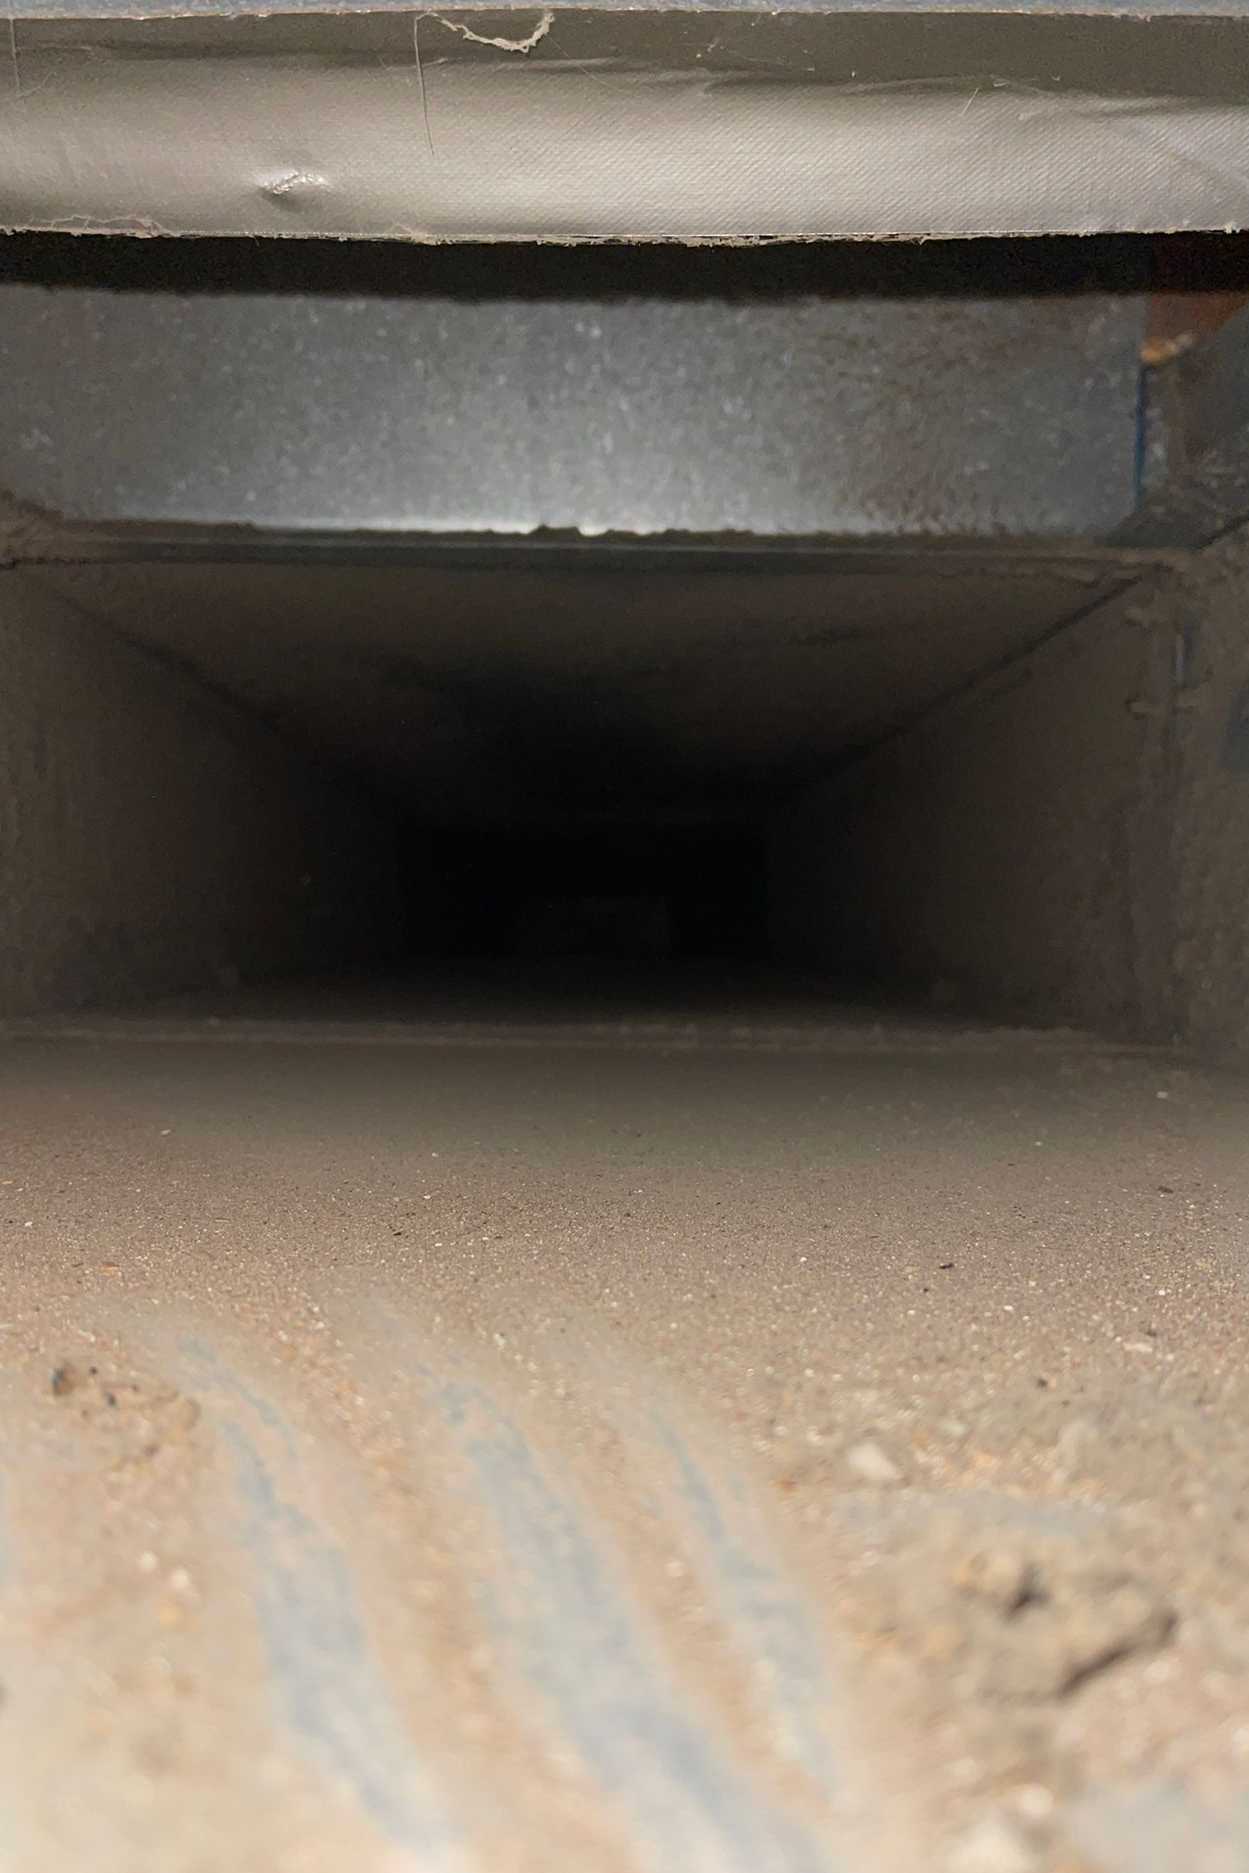 Air Duct Cleaning Service In Costa Mesa, CA